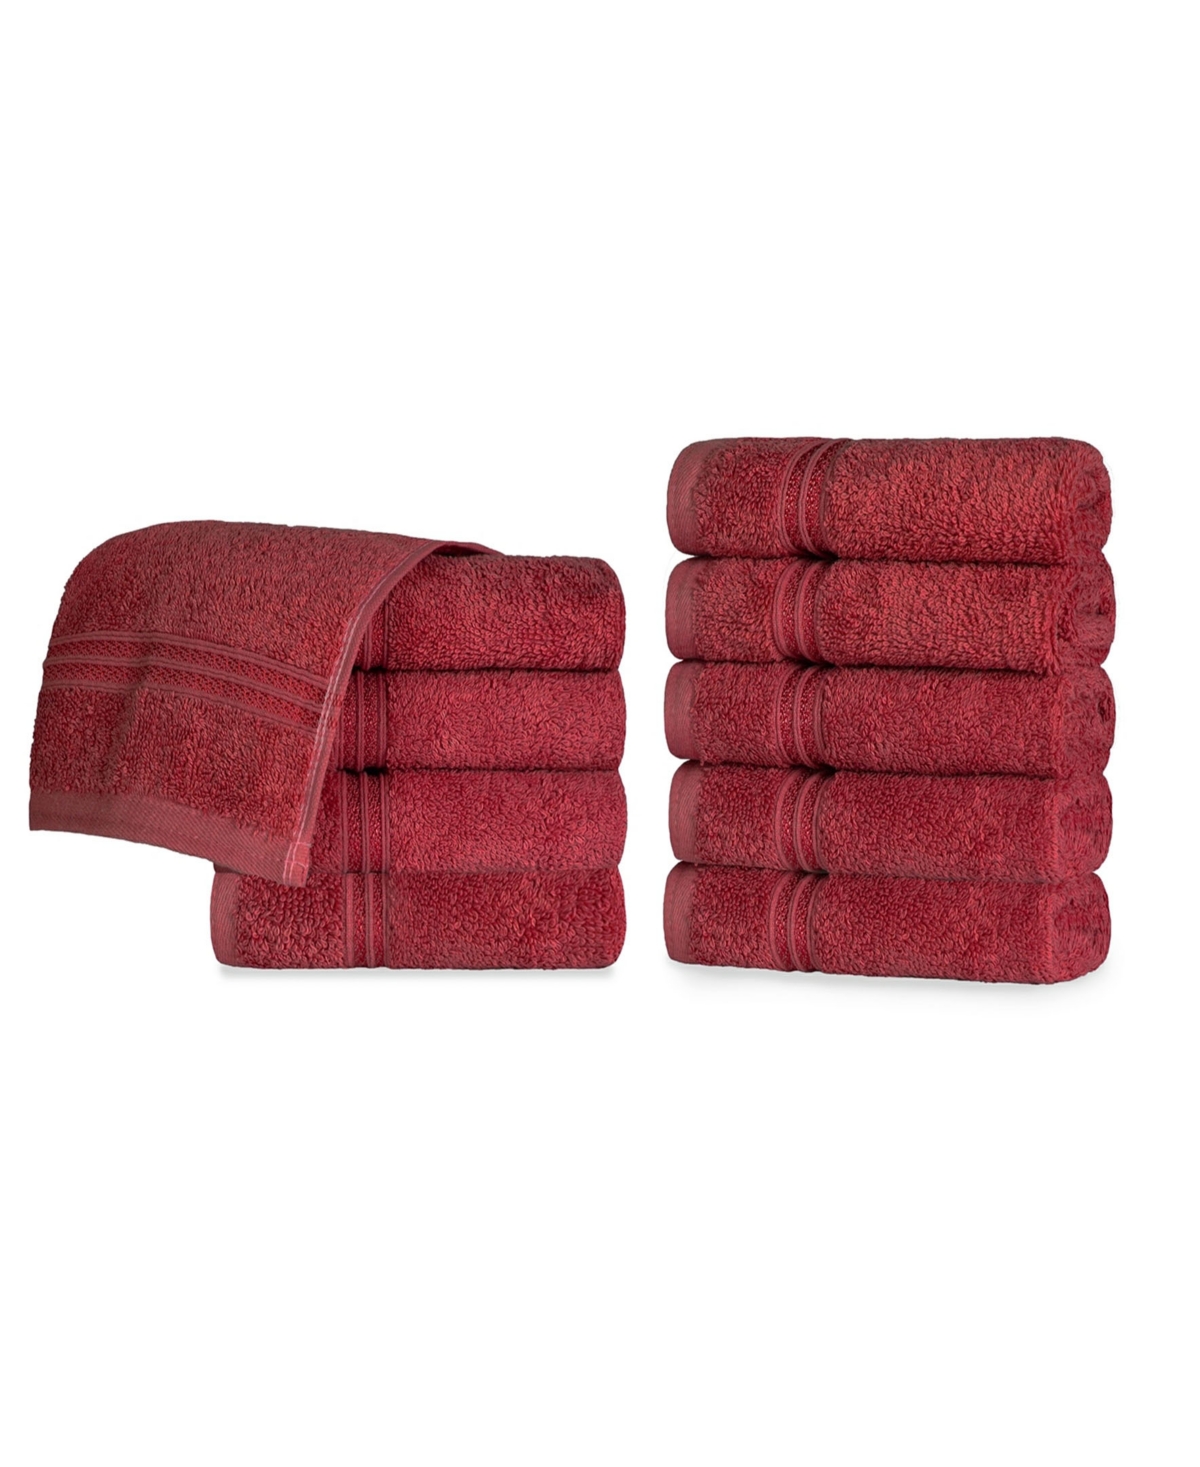 Superior Solid Quick Drying Absorbent 10 Piece Egyptian Cotton Face Towel Set Bedding In Burgundy